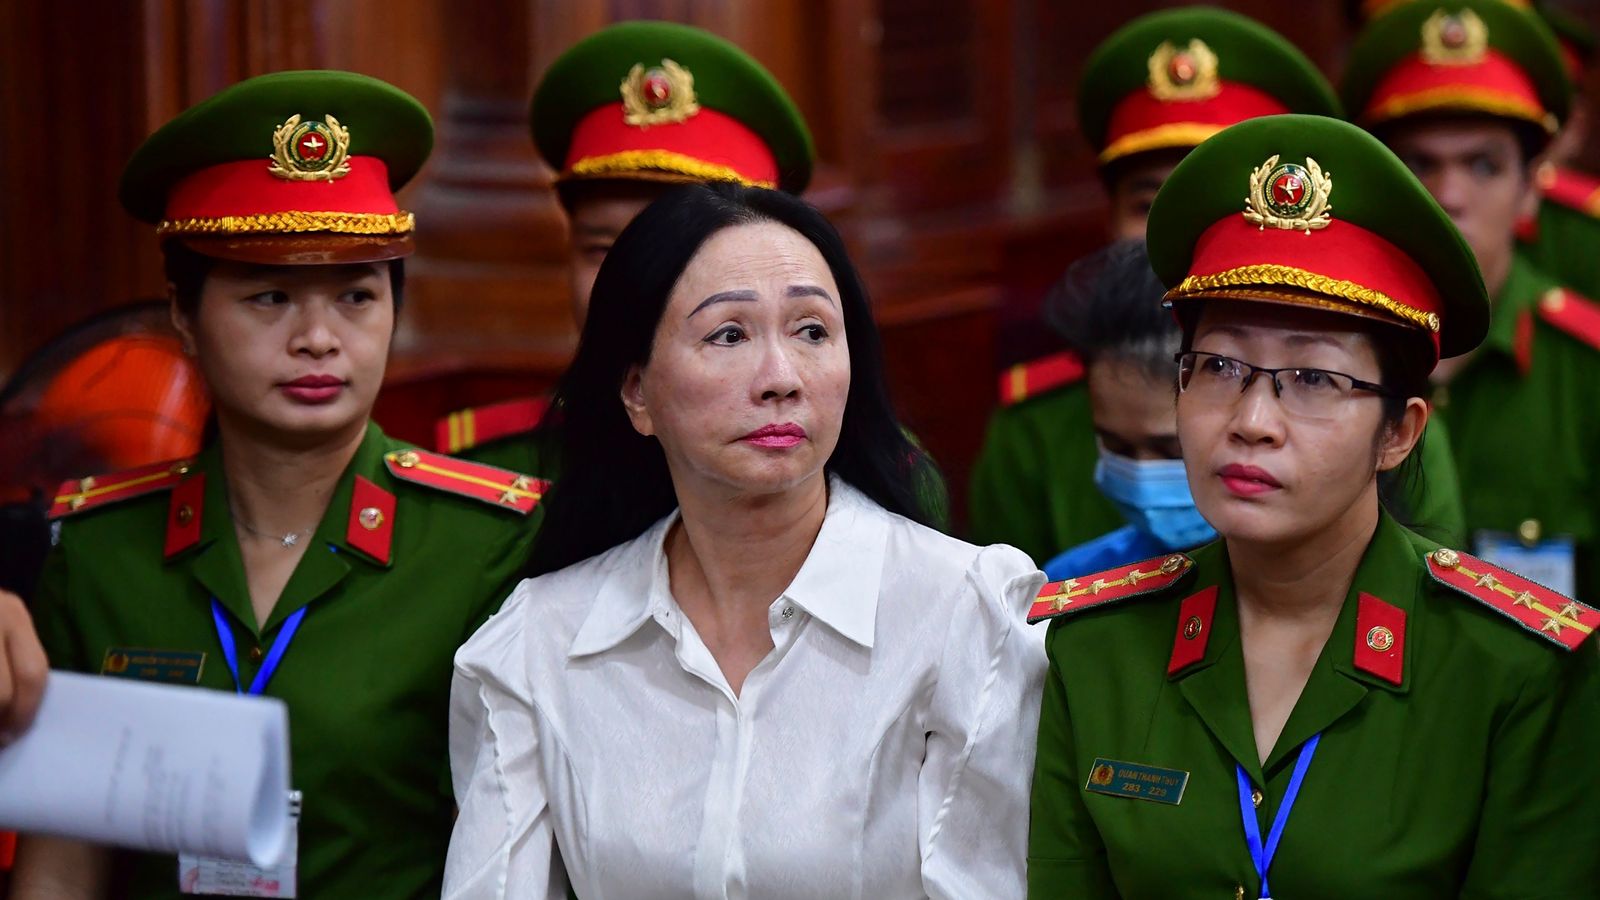 Vietnam: Property tycoon Truong My Lan sentenced to death after country's biggest fraud trial